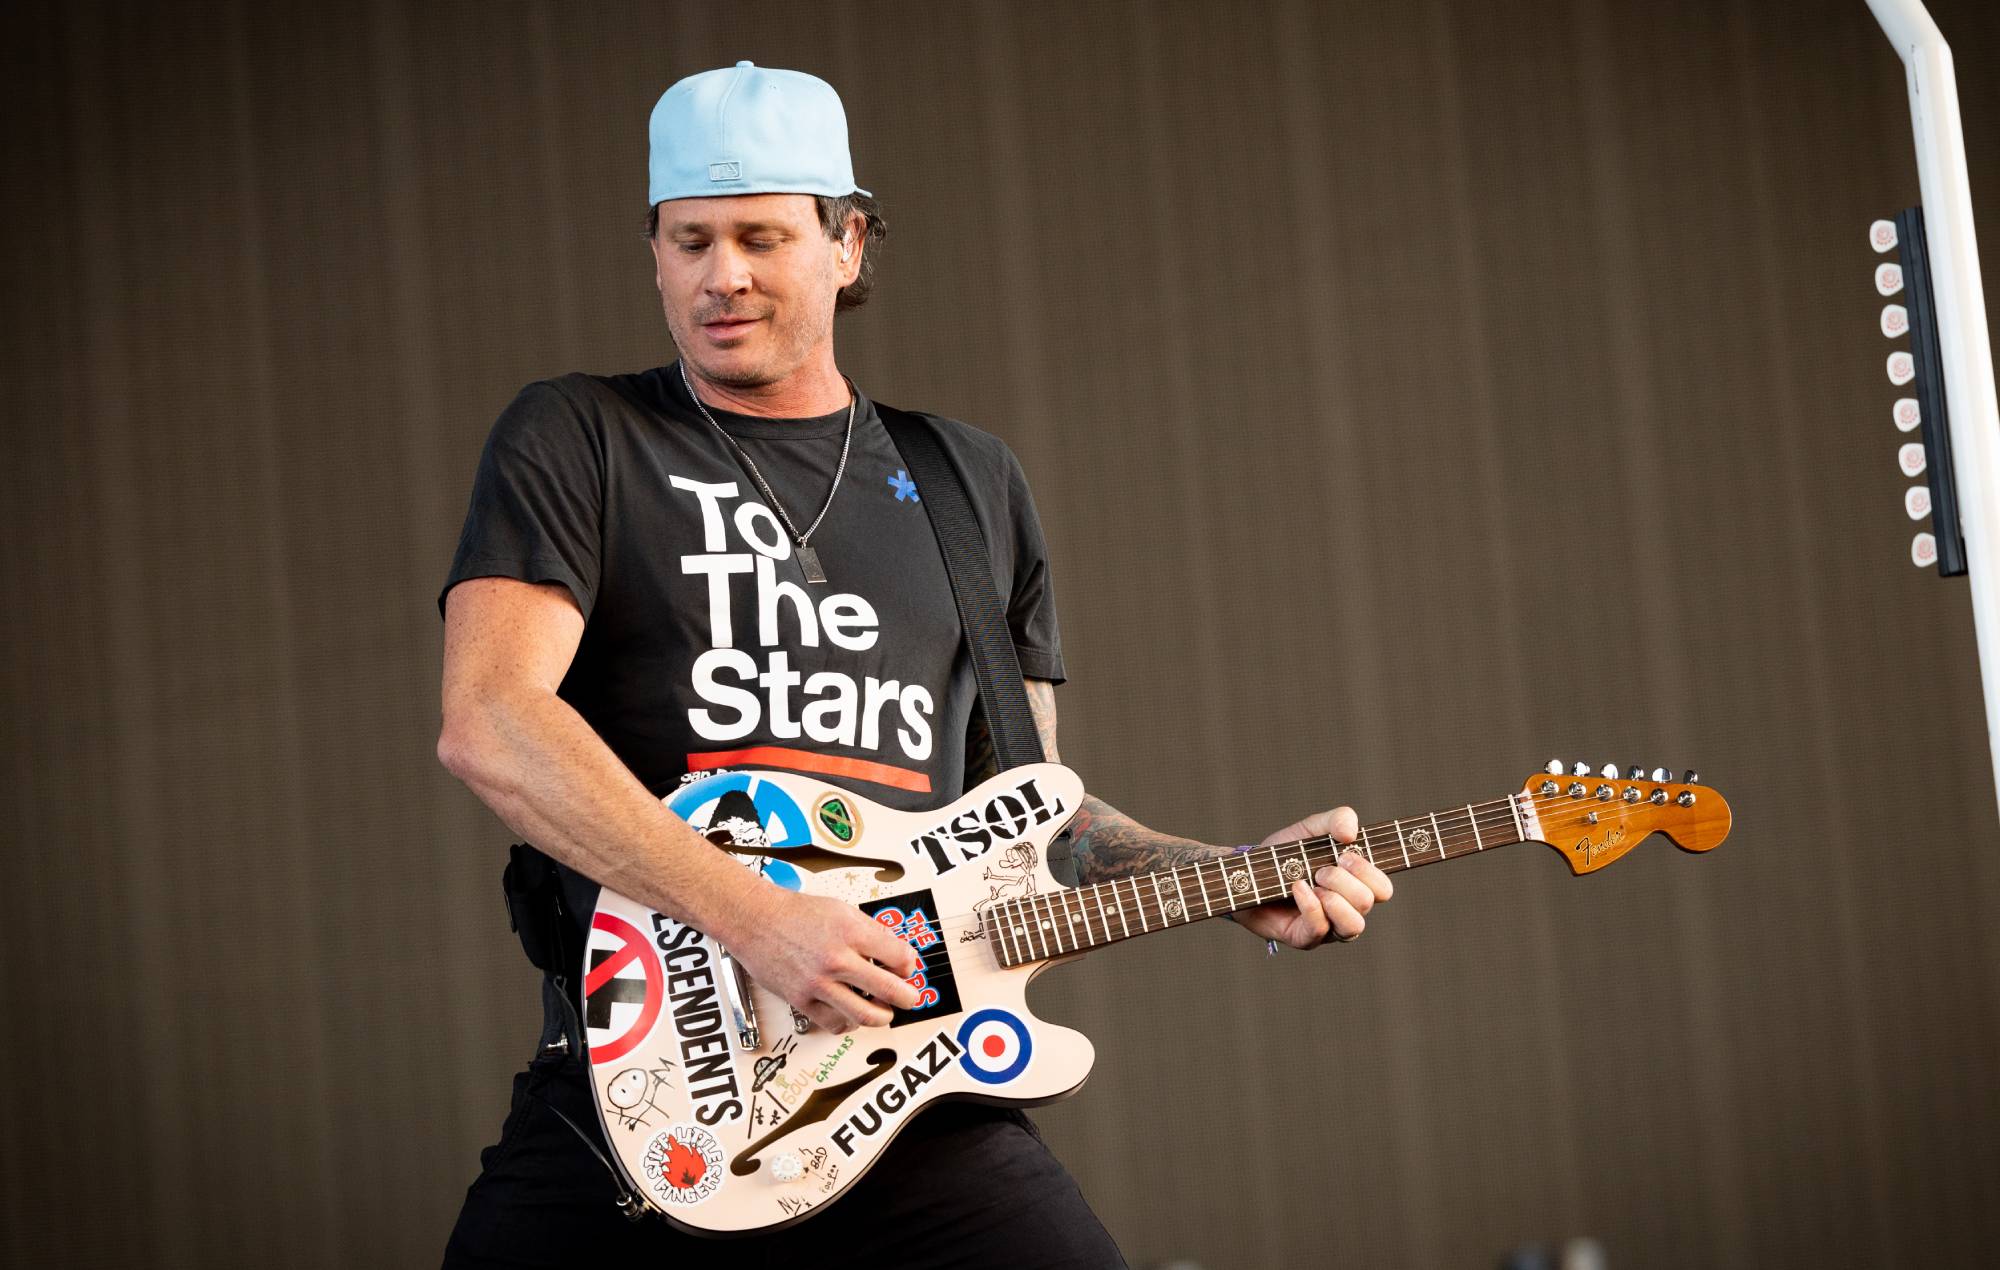 Blink-182’s Tom DeLonge is putting out a new sci-fi novel